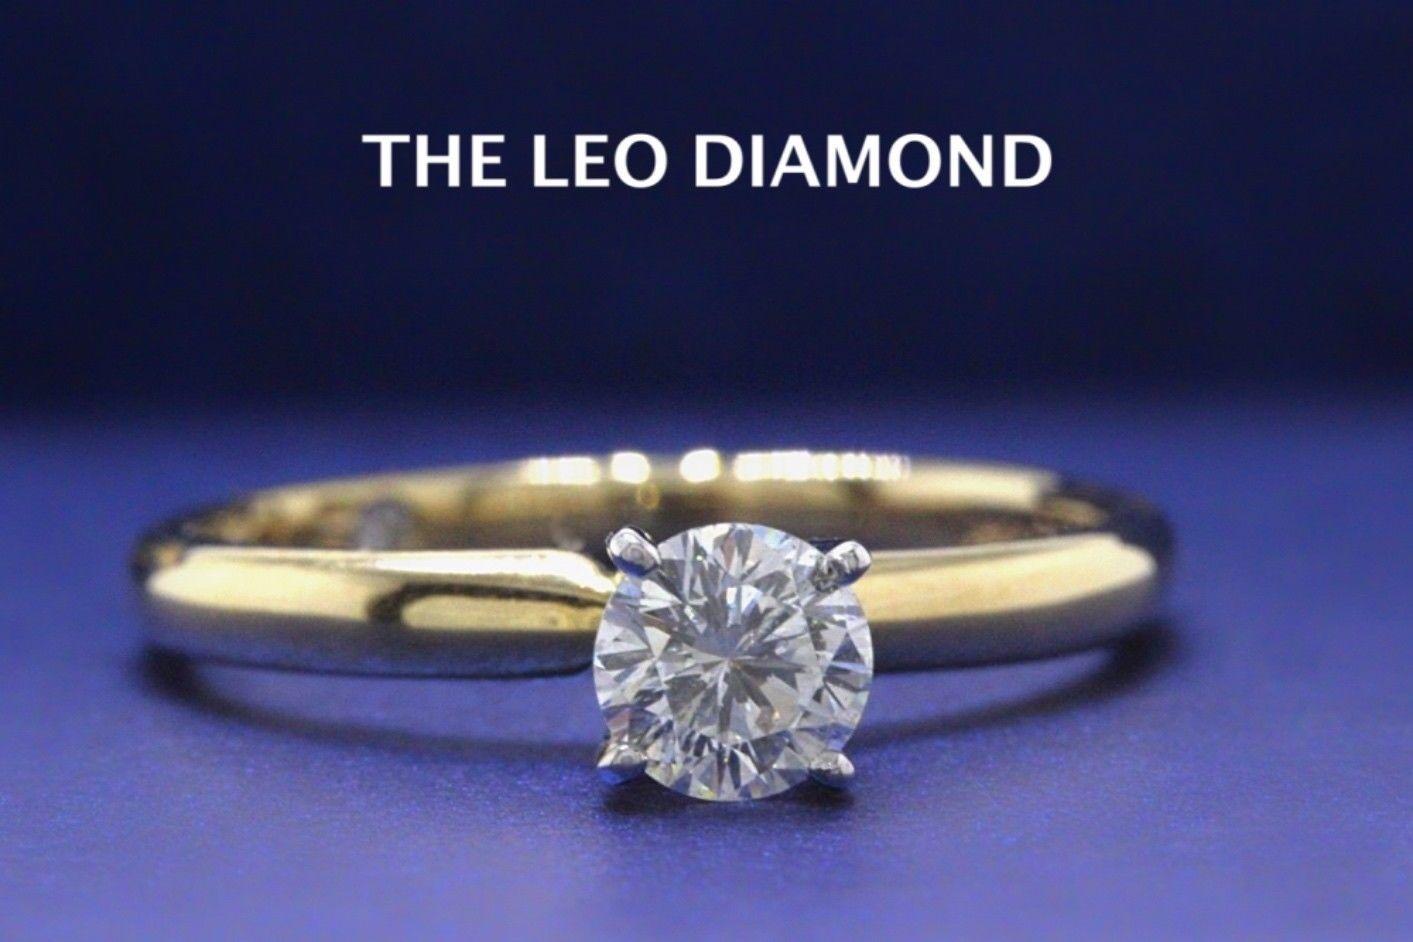 THE LEO DIAMOND SOLITAIRE ENGAGEMENT RING
Style:  4 - Prong Solitaire
Serial Number:  LEO251462
Certificate:  GSI # 348950005
Metal: 14K Yellow Gold
Size:  6.75 - Sizable
Total Carat Weight:  0.45 CTS
Diamond Shape:  Leo Round
Diamond Color &